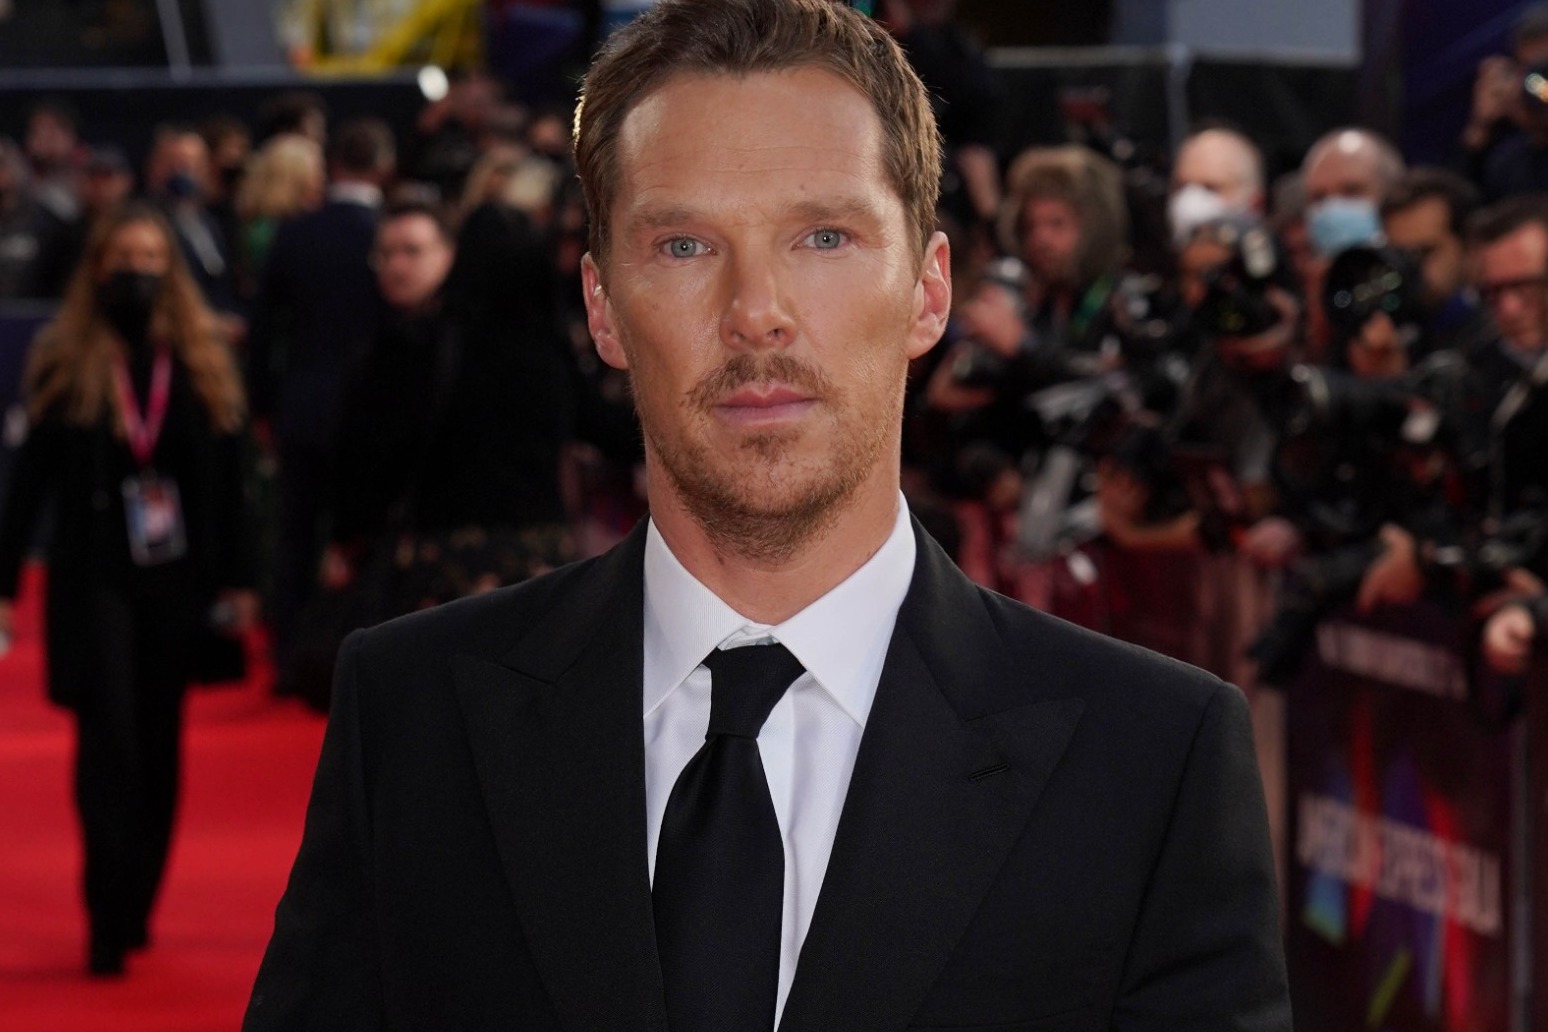 Benedict Cumberbatch stole parts of his cowboy costume for labouring at home